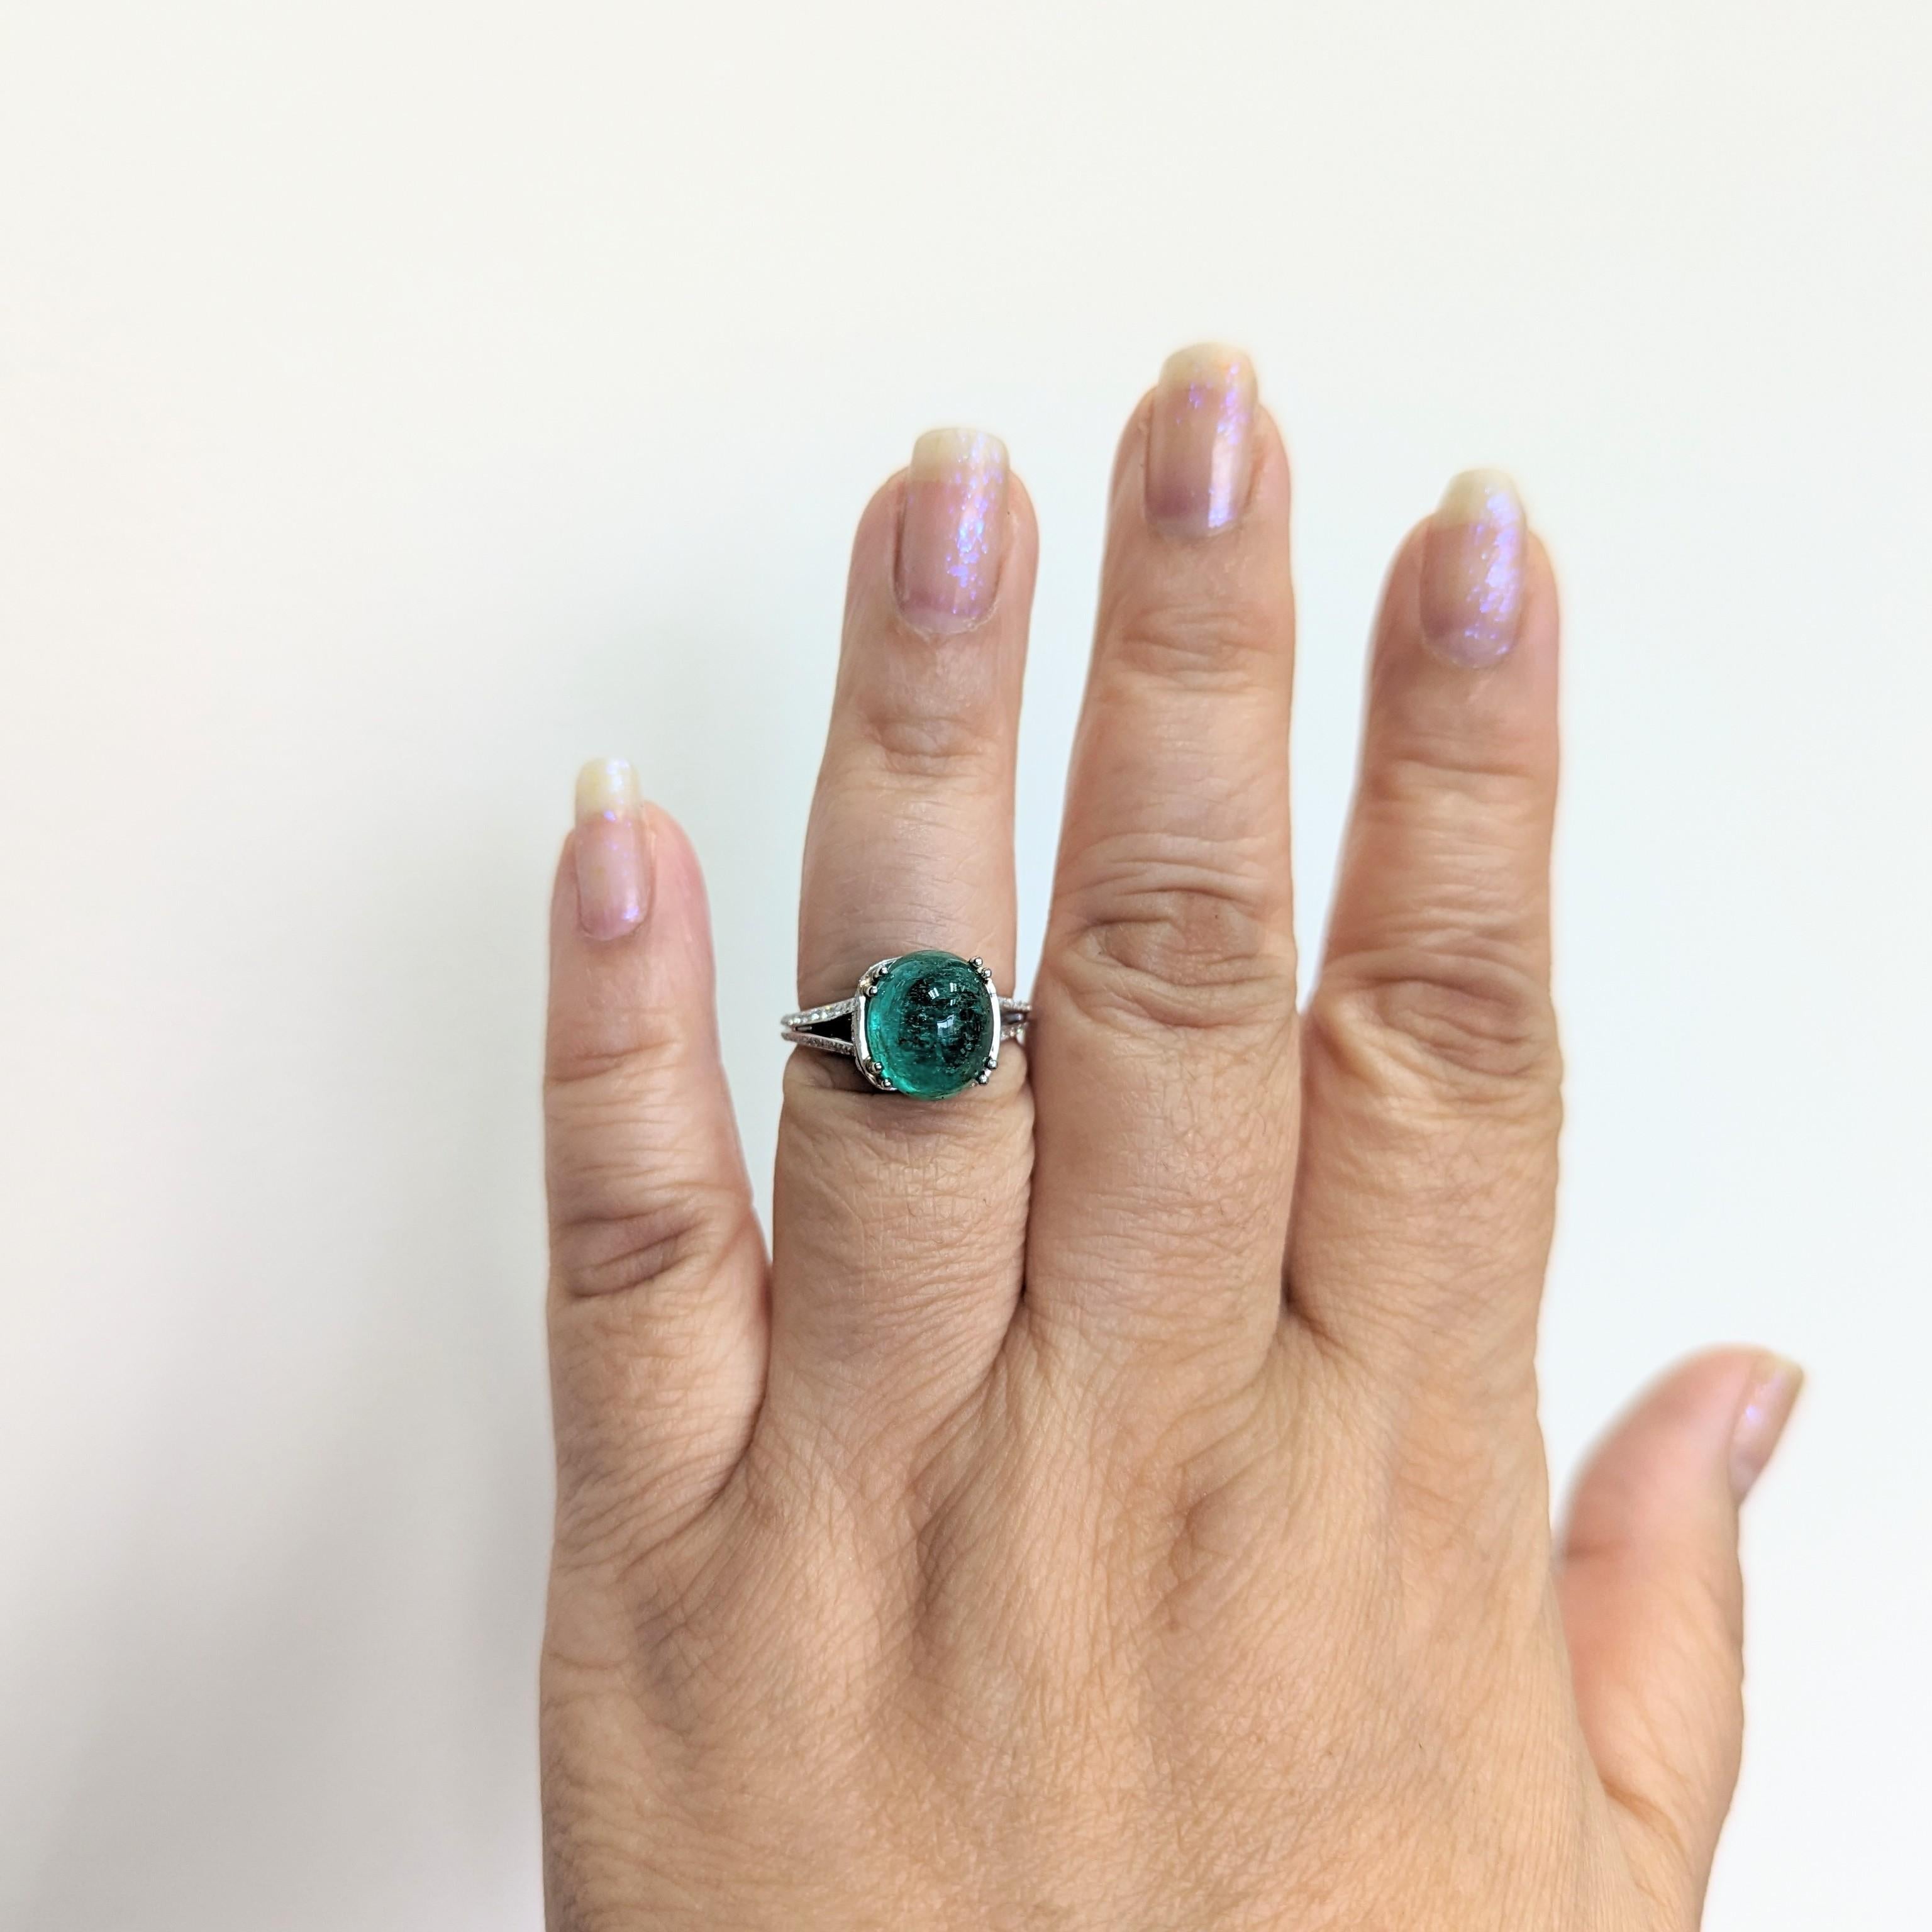 Beautiful 5.95 ct. emerald cabochon and 0.15 ct. white diamond round cocktail ring.  Handmade in platinum.  Ring size 6.5.